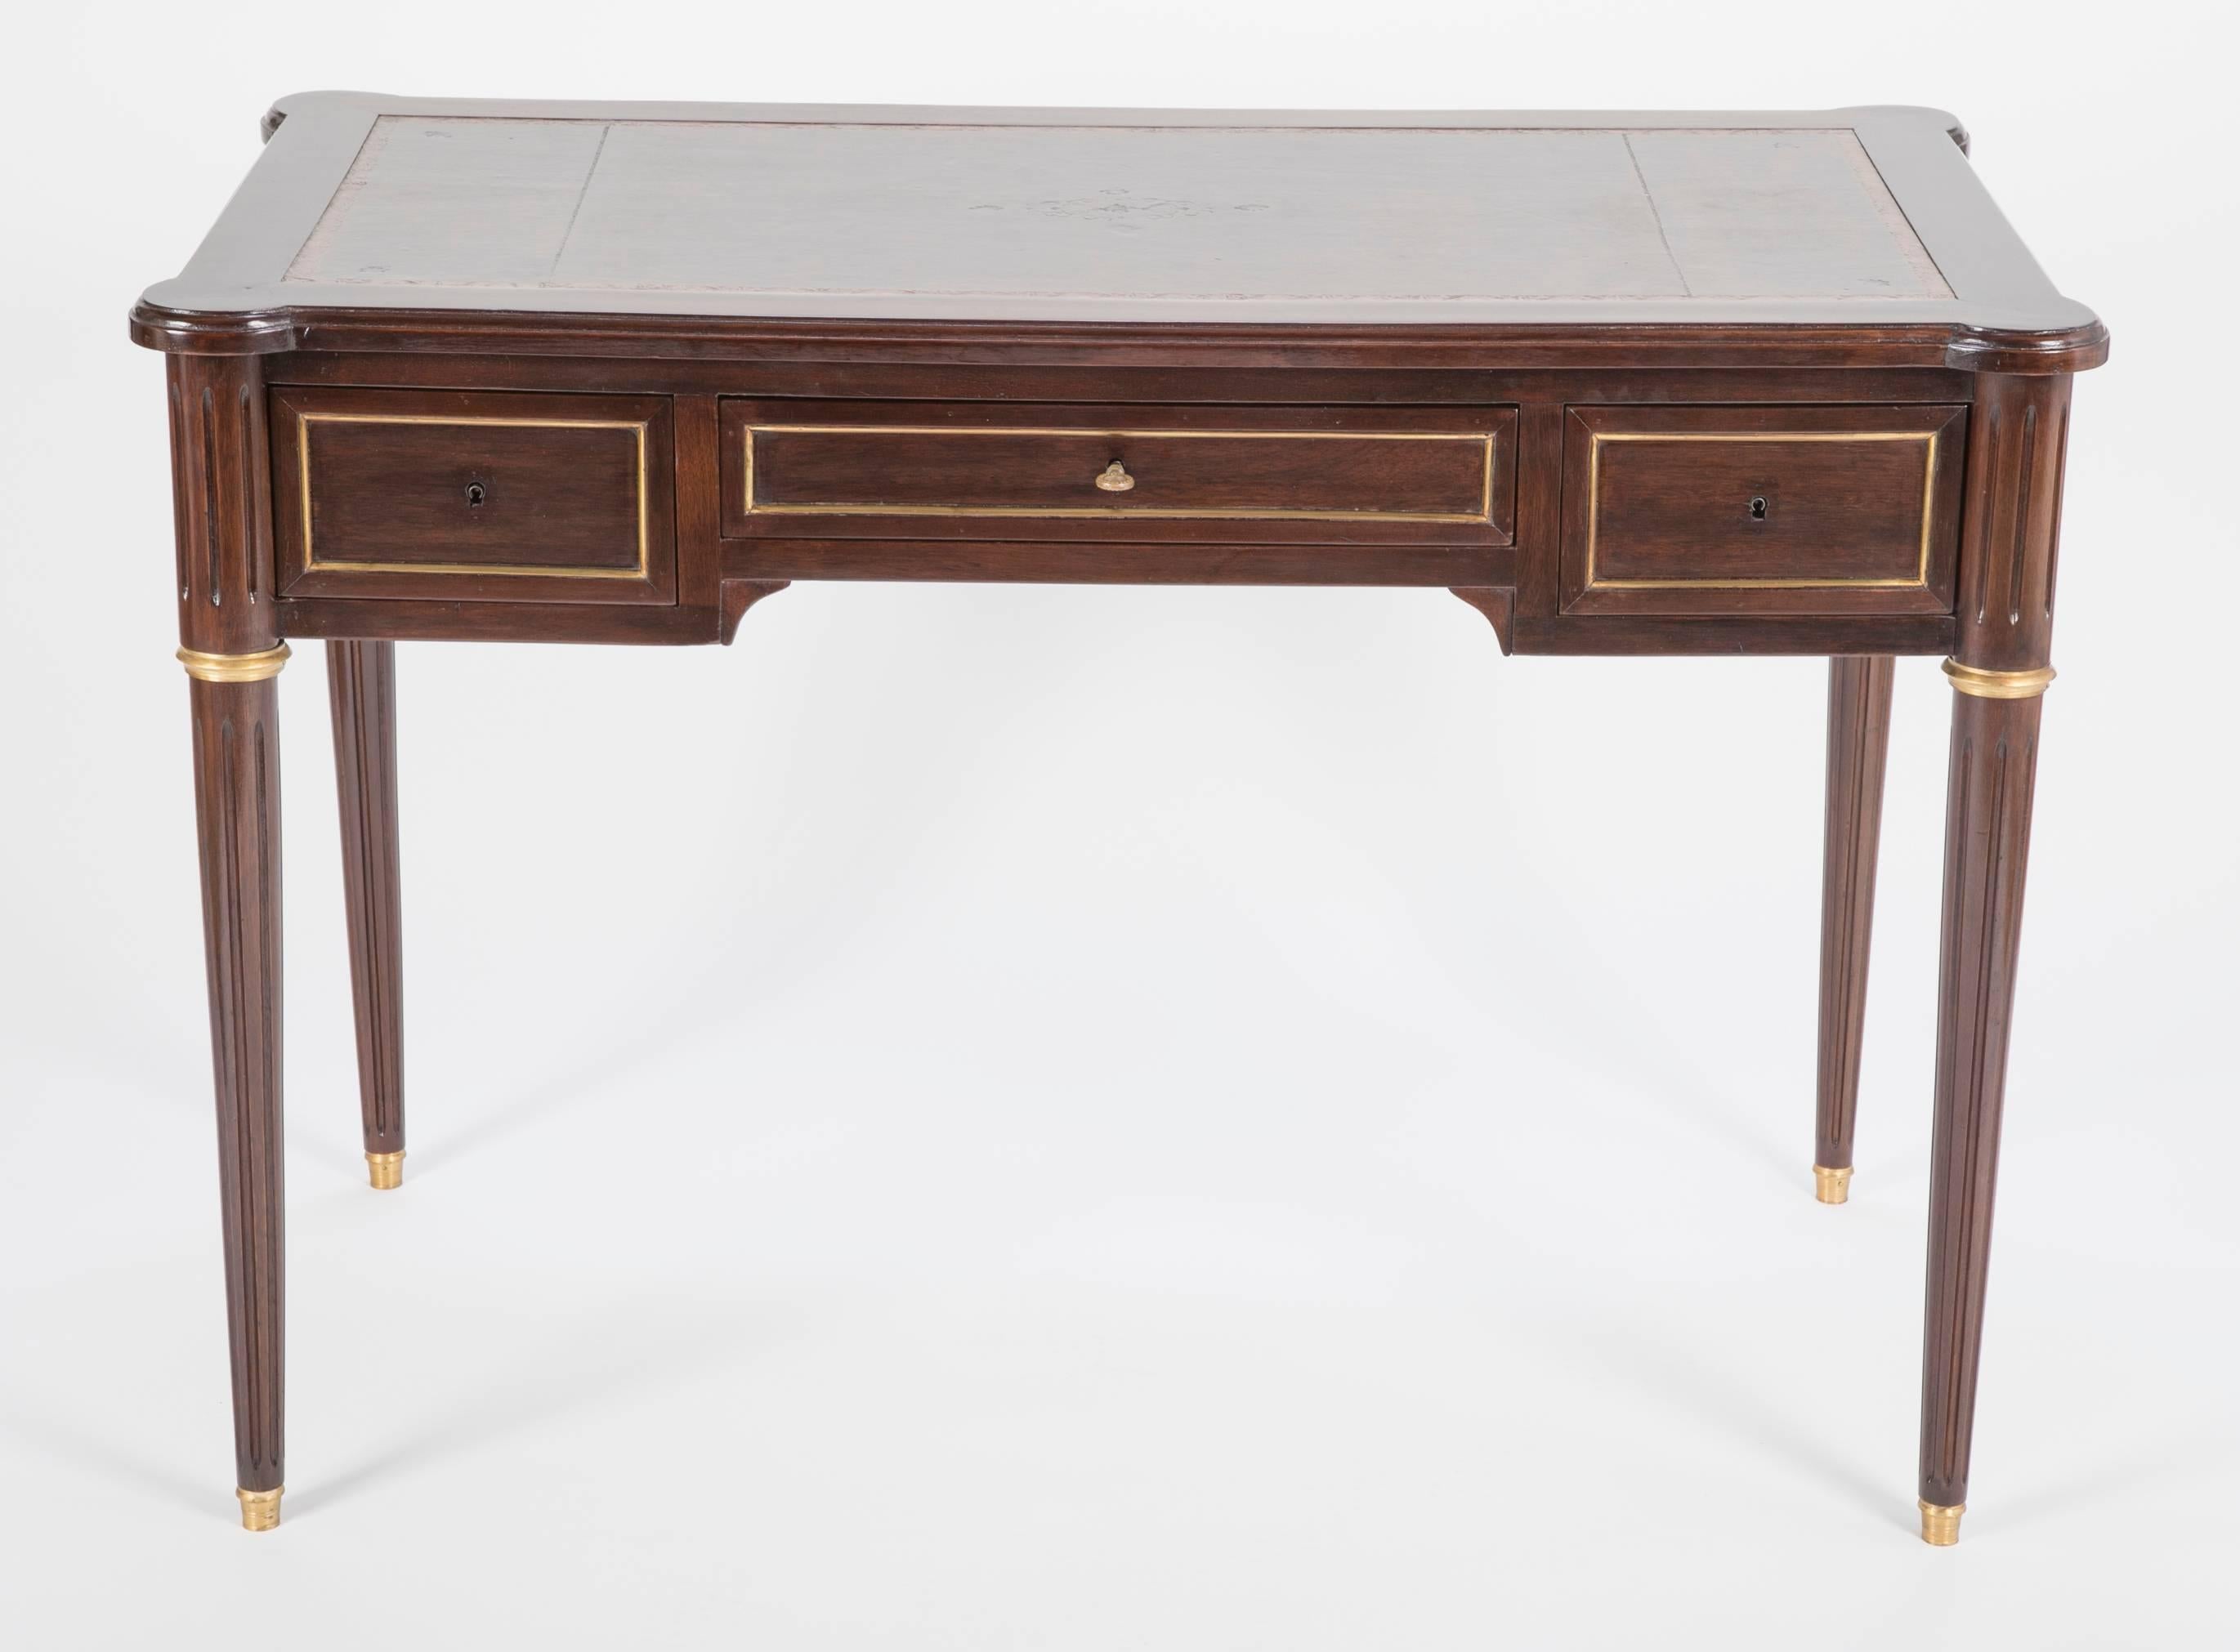 A Directoire style mahogany desk with inset leather top having three drawers and brass trim.